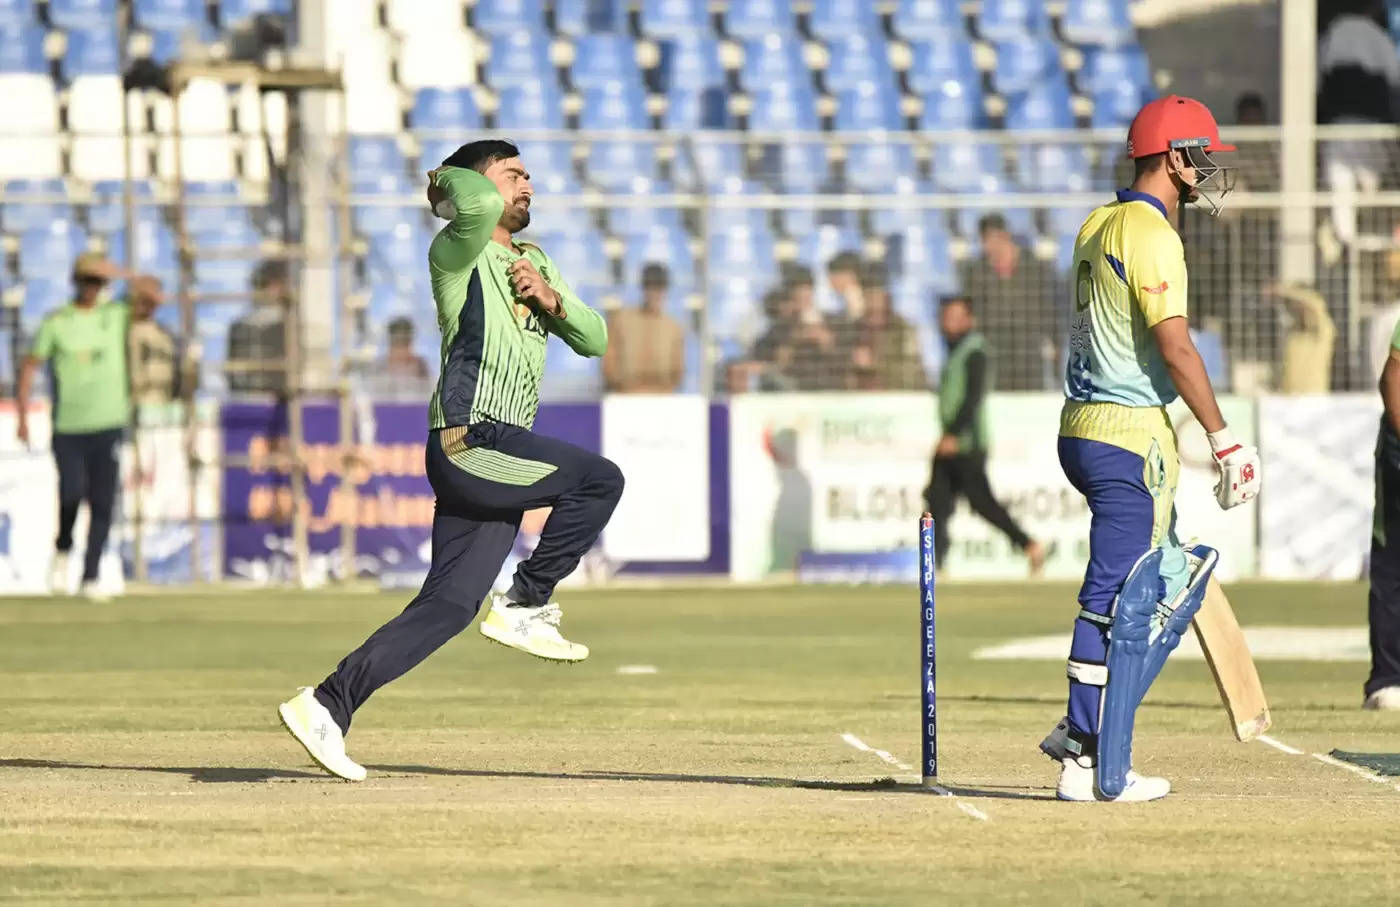 Afghanistan players to probably miss CPL 2020 playoffs